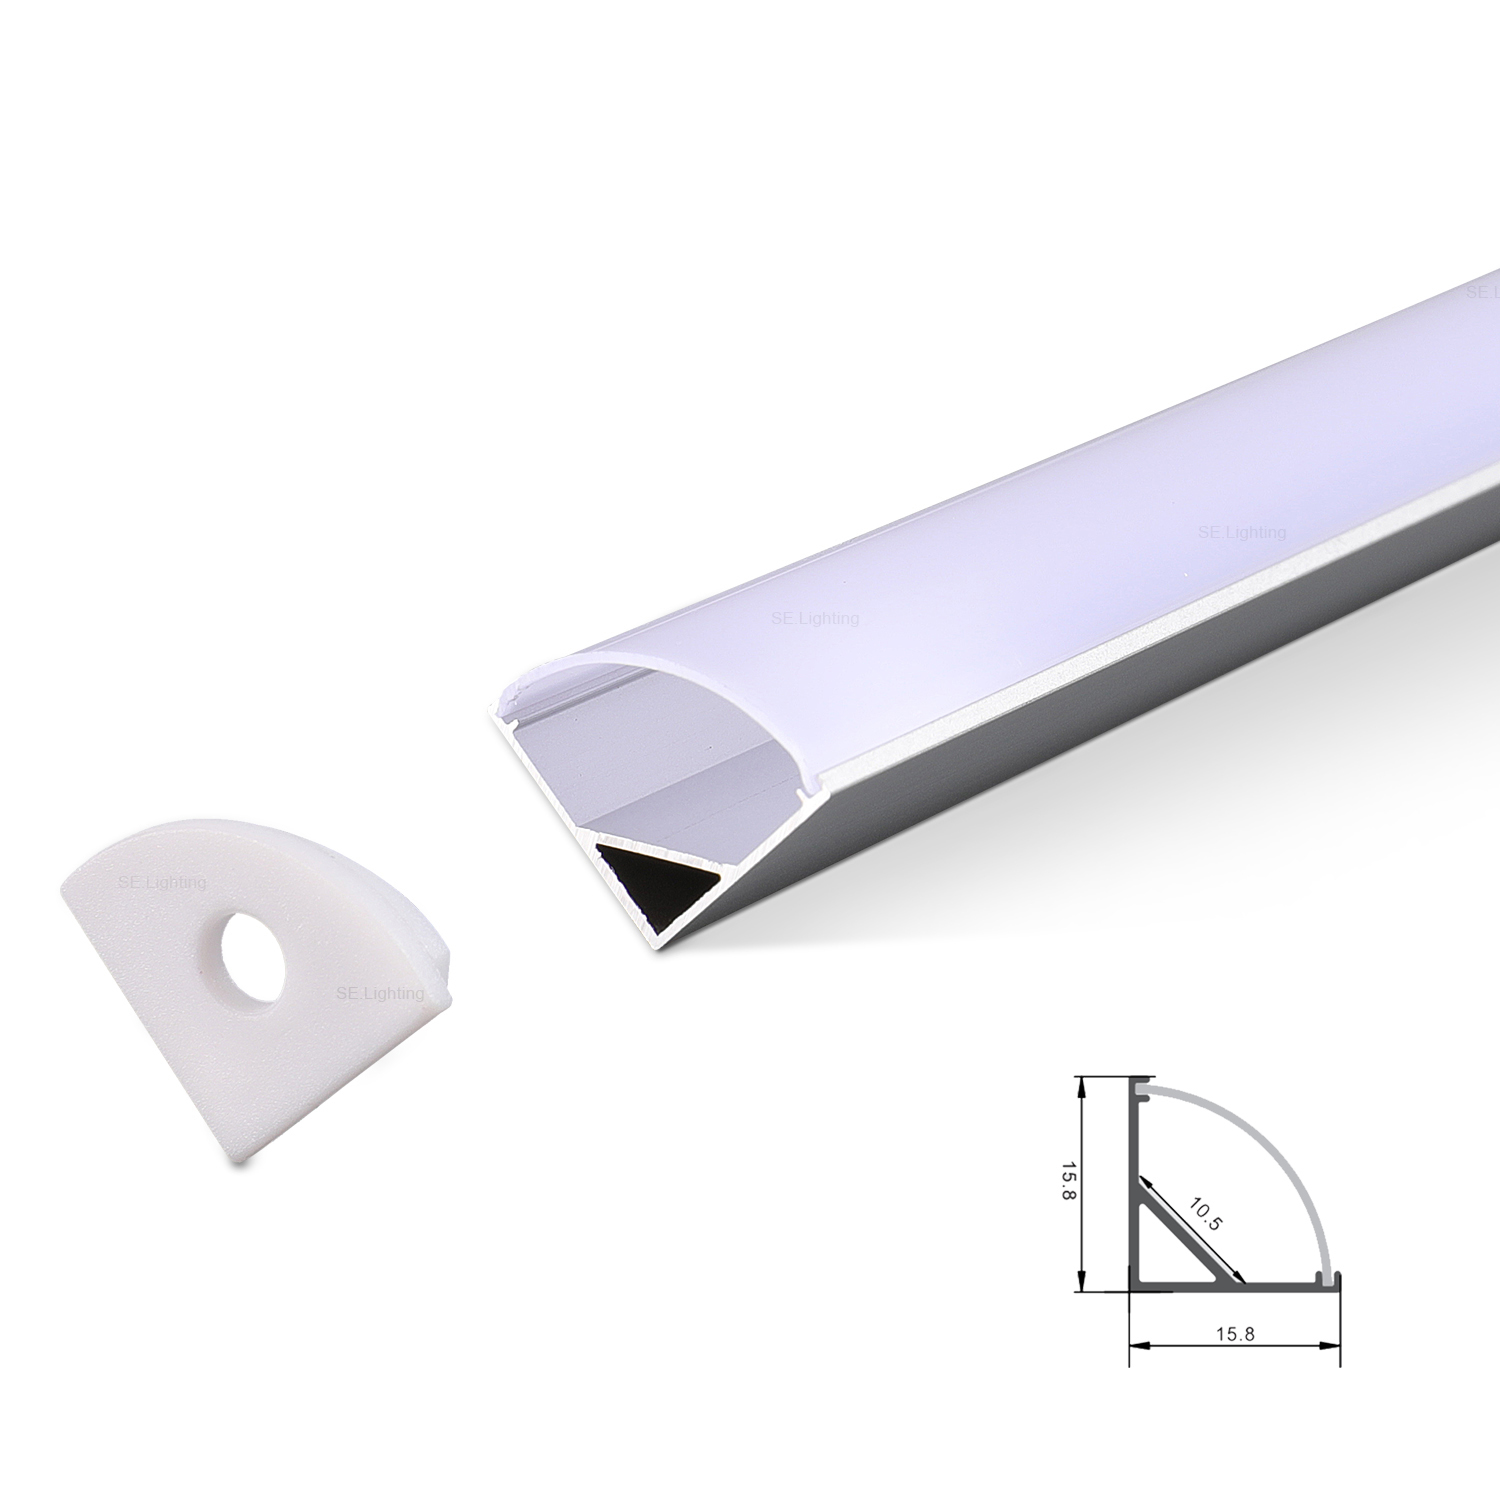 Aluminum Channels for LED Strip Lights - Are They Worth It? An In